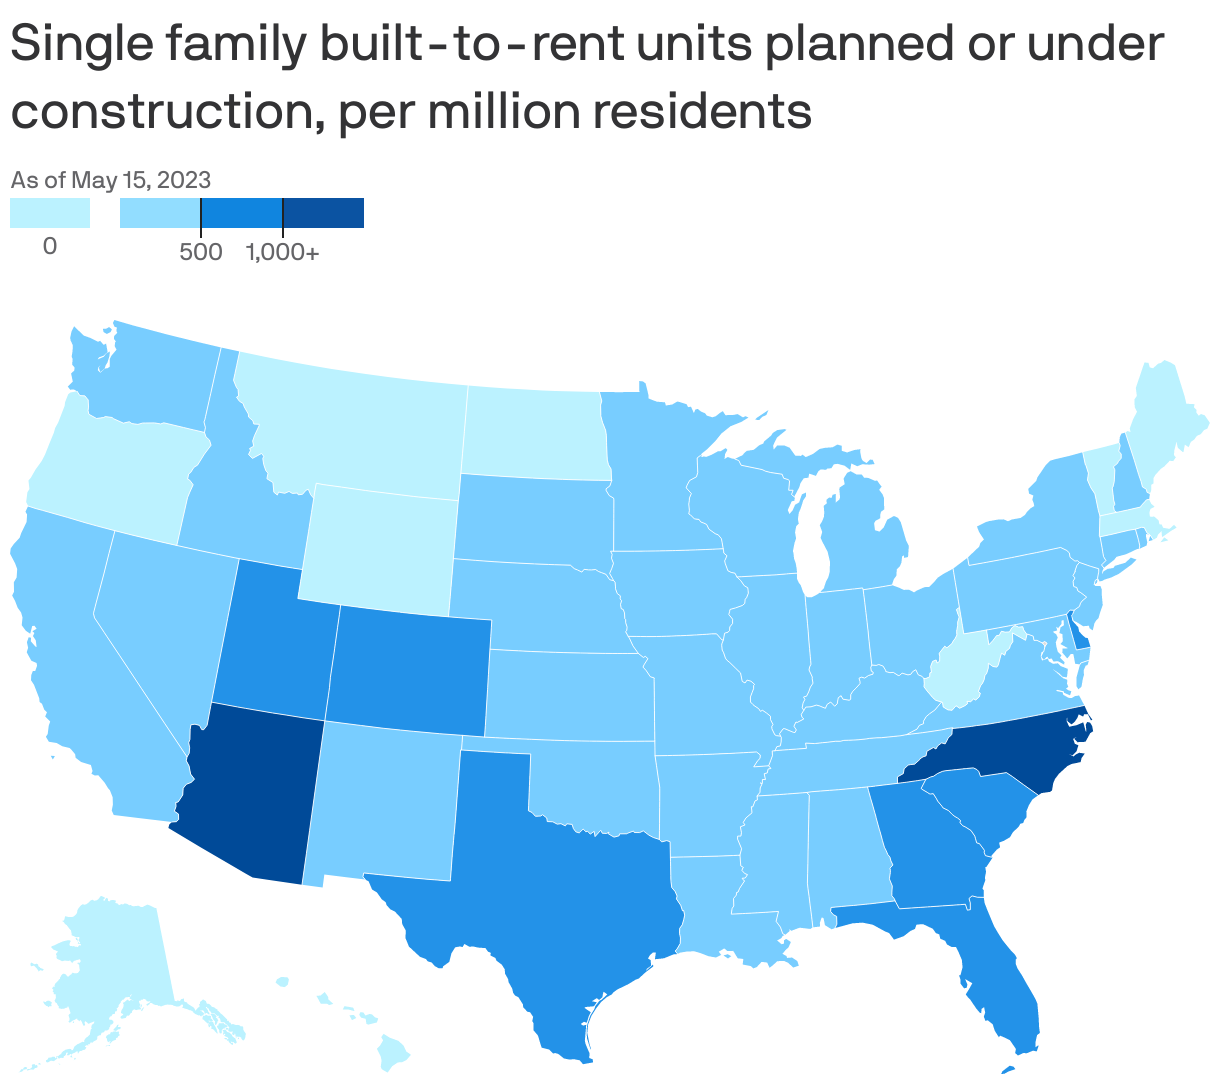 Single family built-to-rent units planned or under construction, per million residents